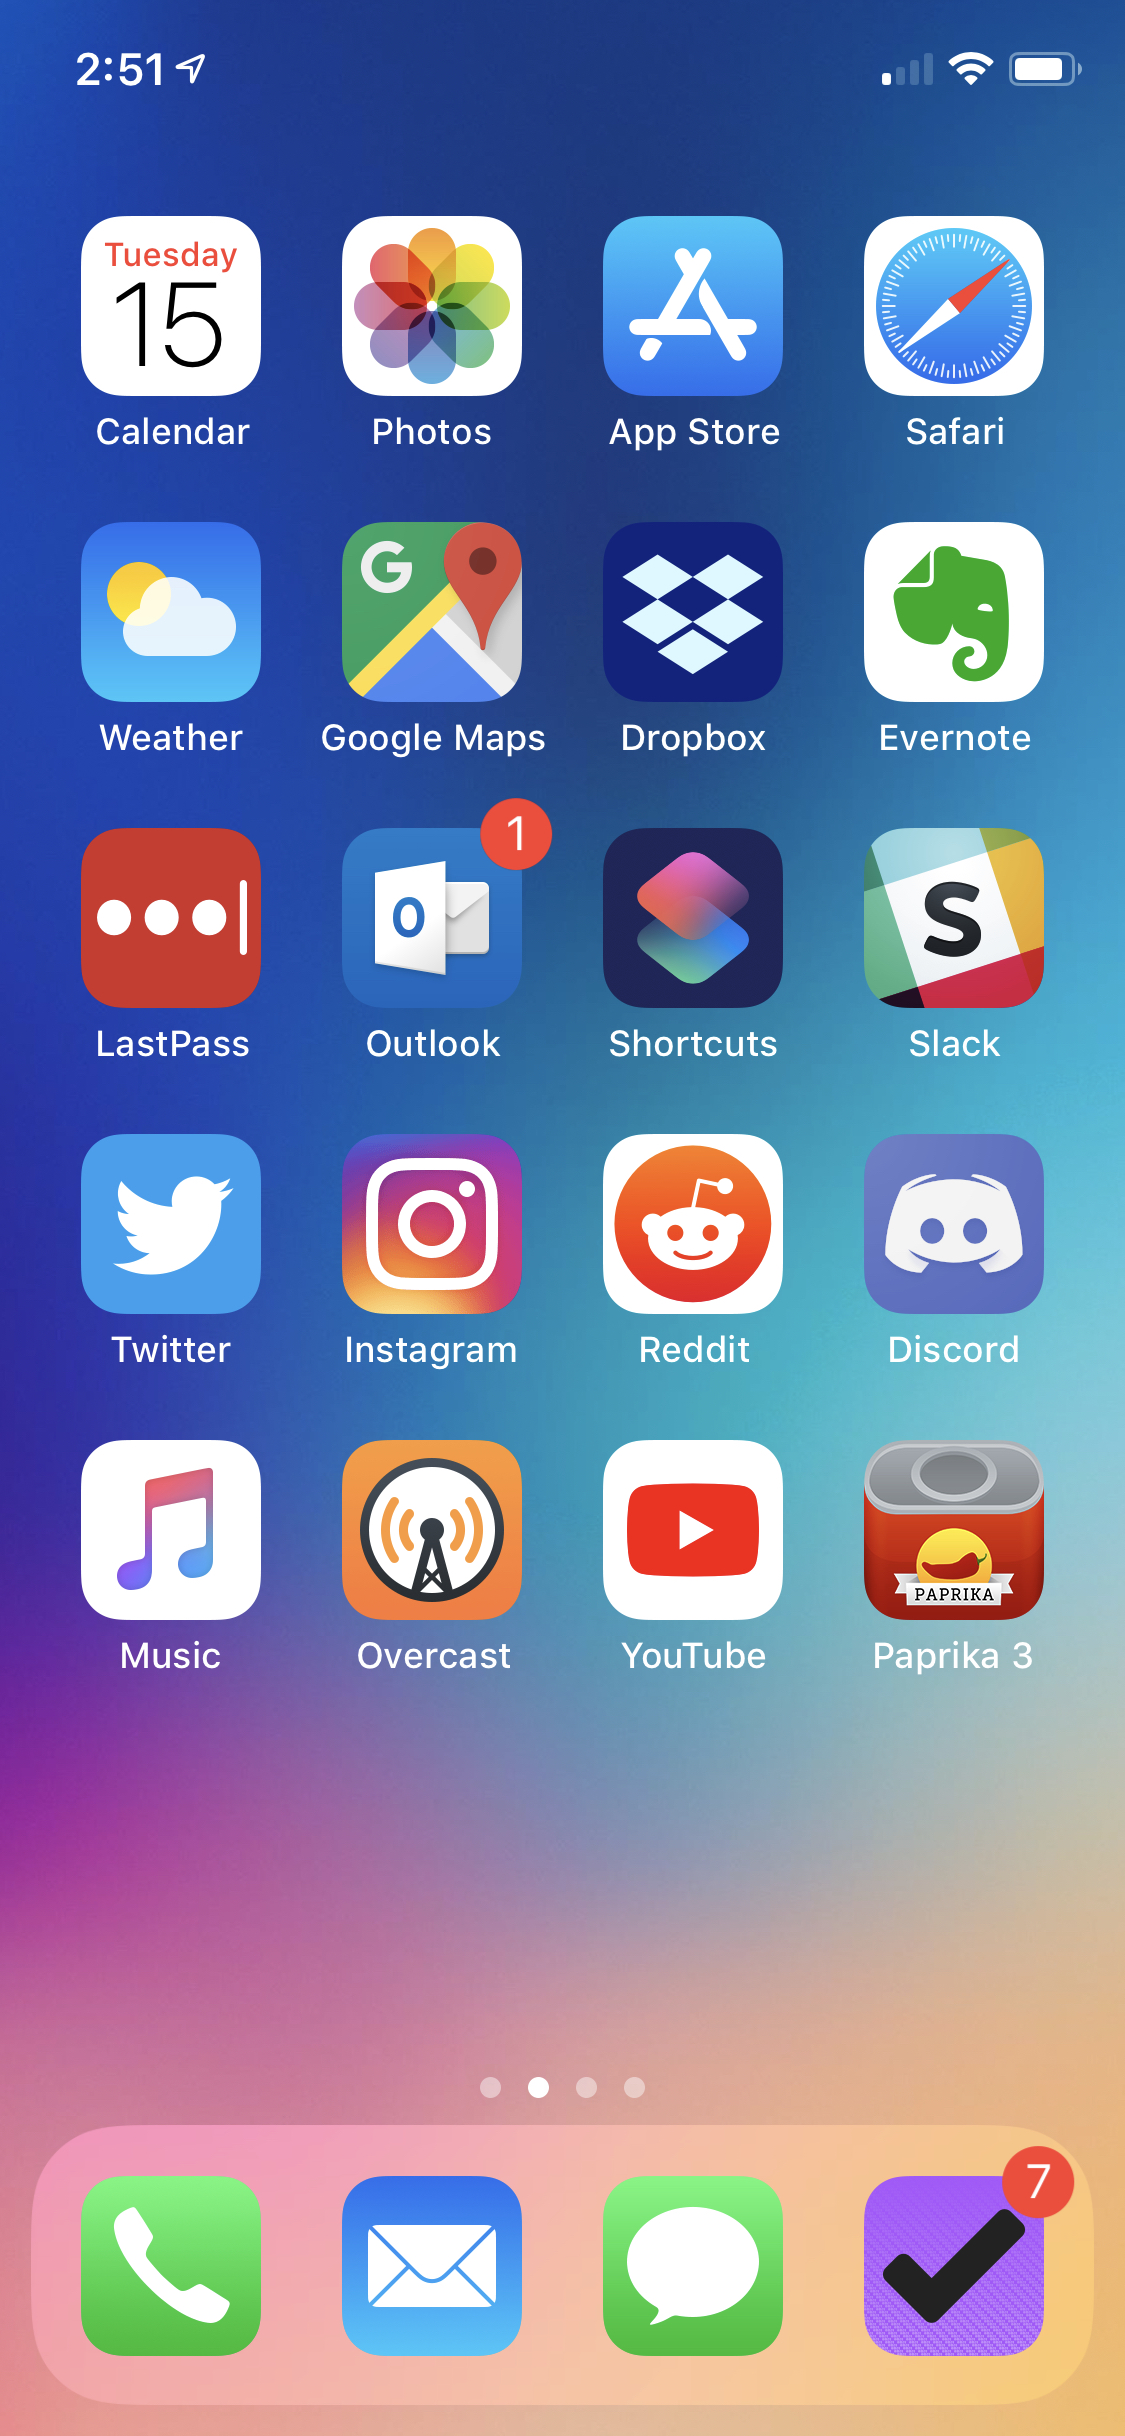 My iPhone home screen as of January 2019